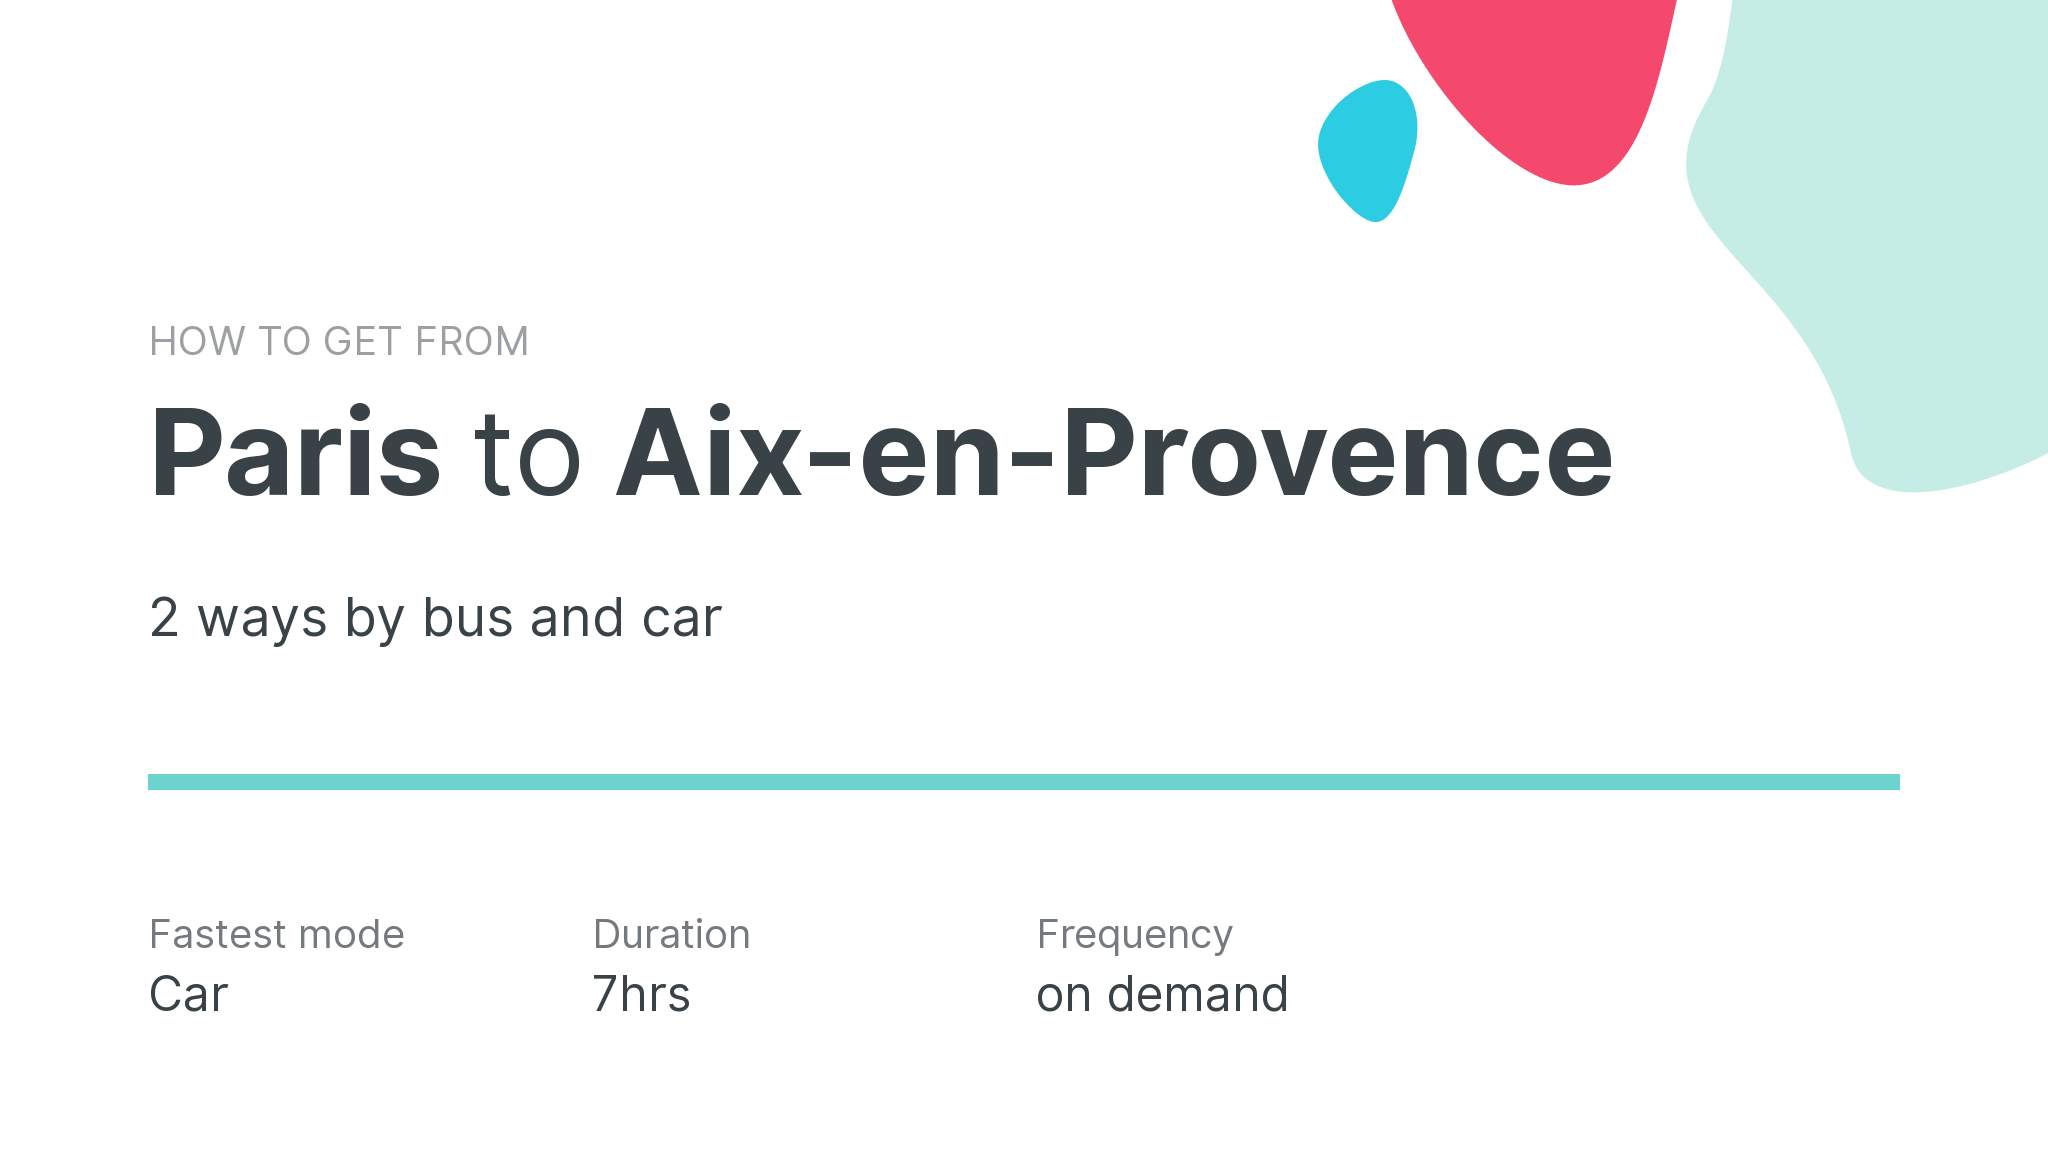 How do I get from Paris to Aix-en-Provence